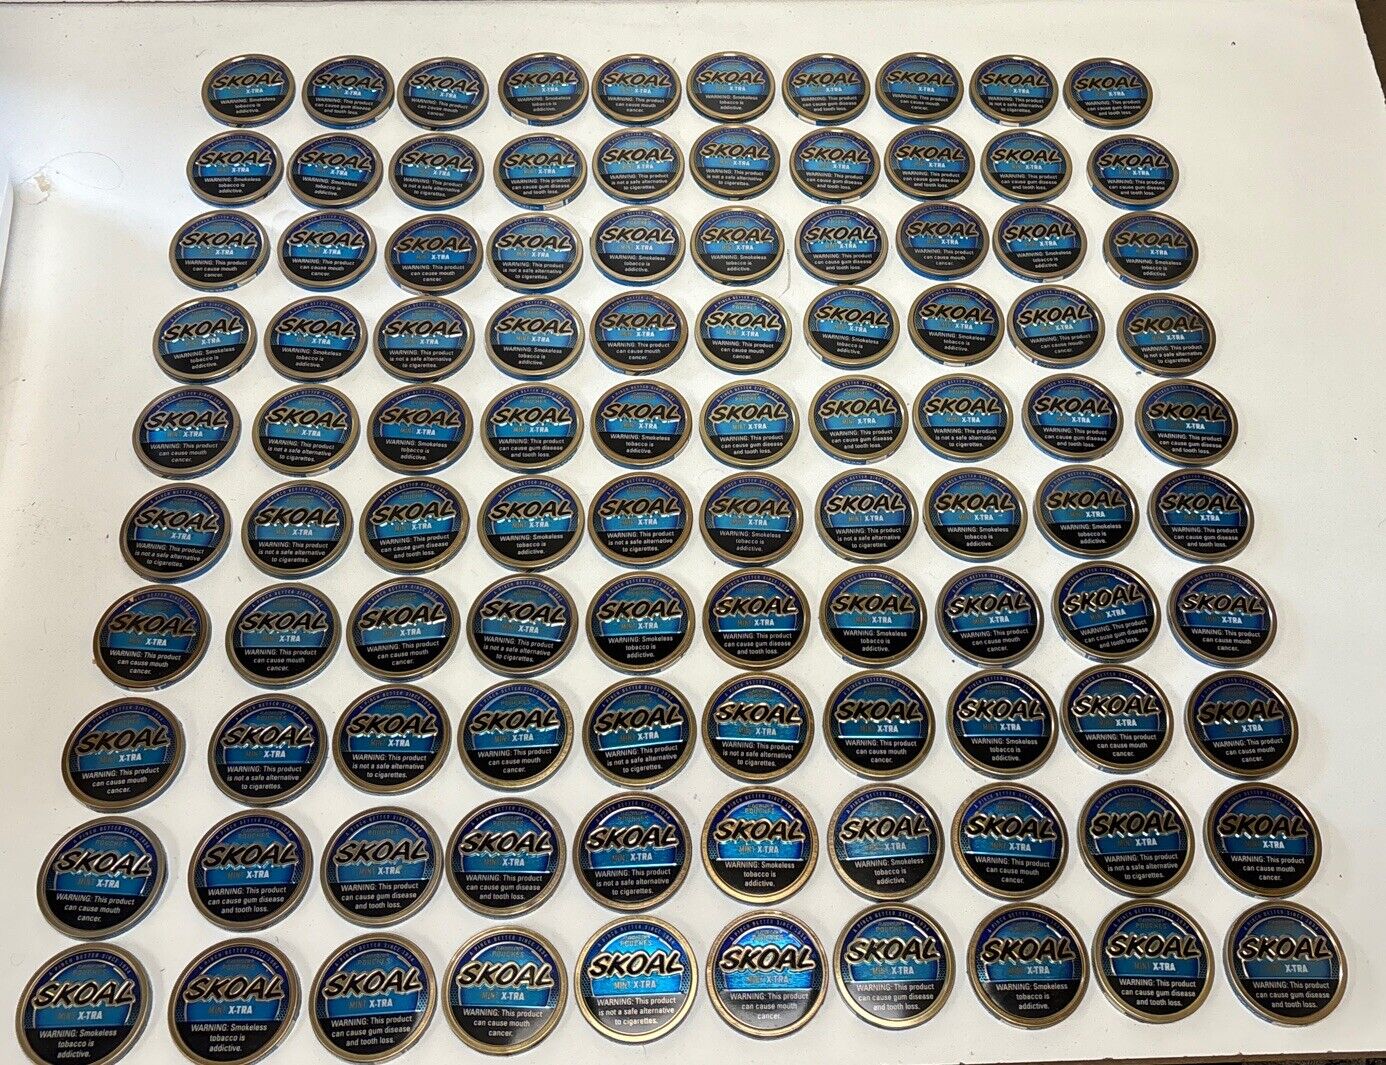 100 SKOAL MINT X-TRA LIDS for Crafts Lids Only No tobacco